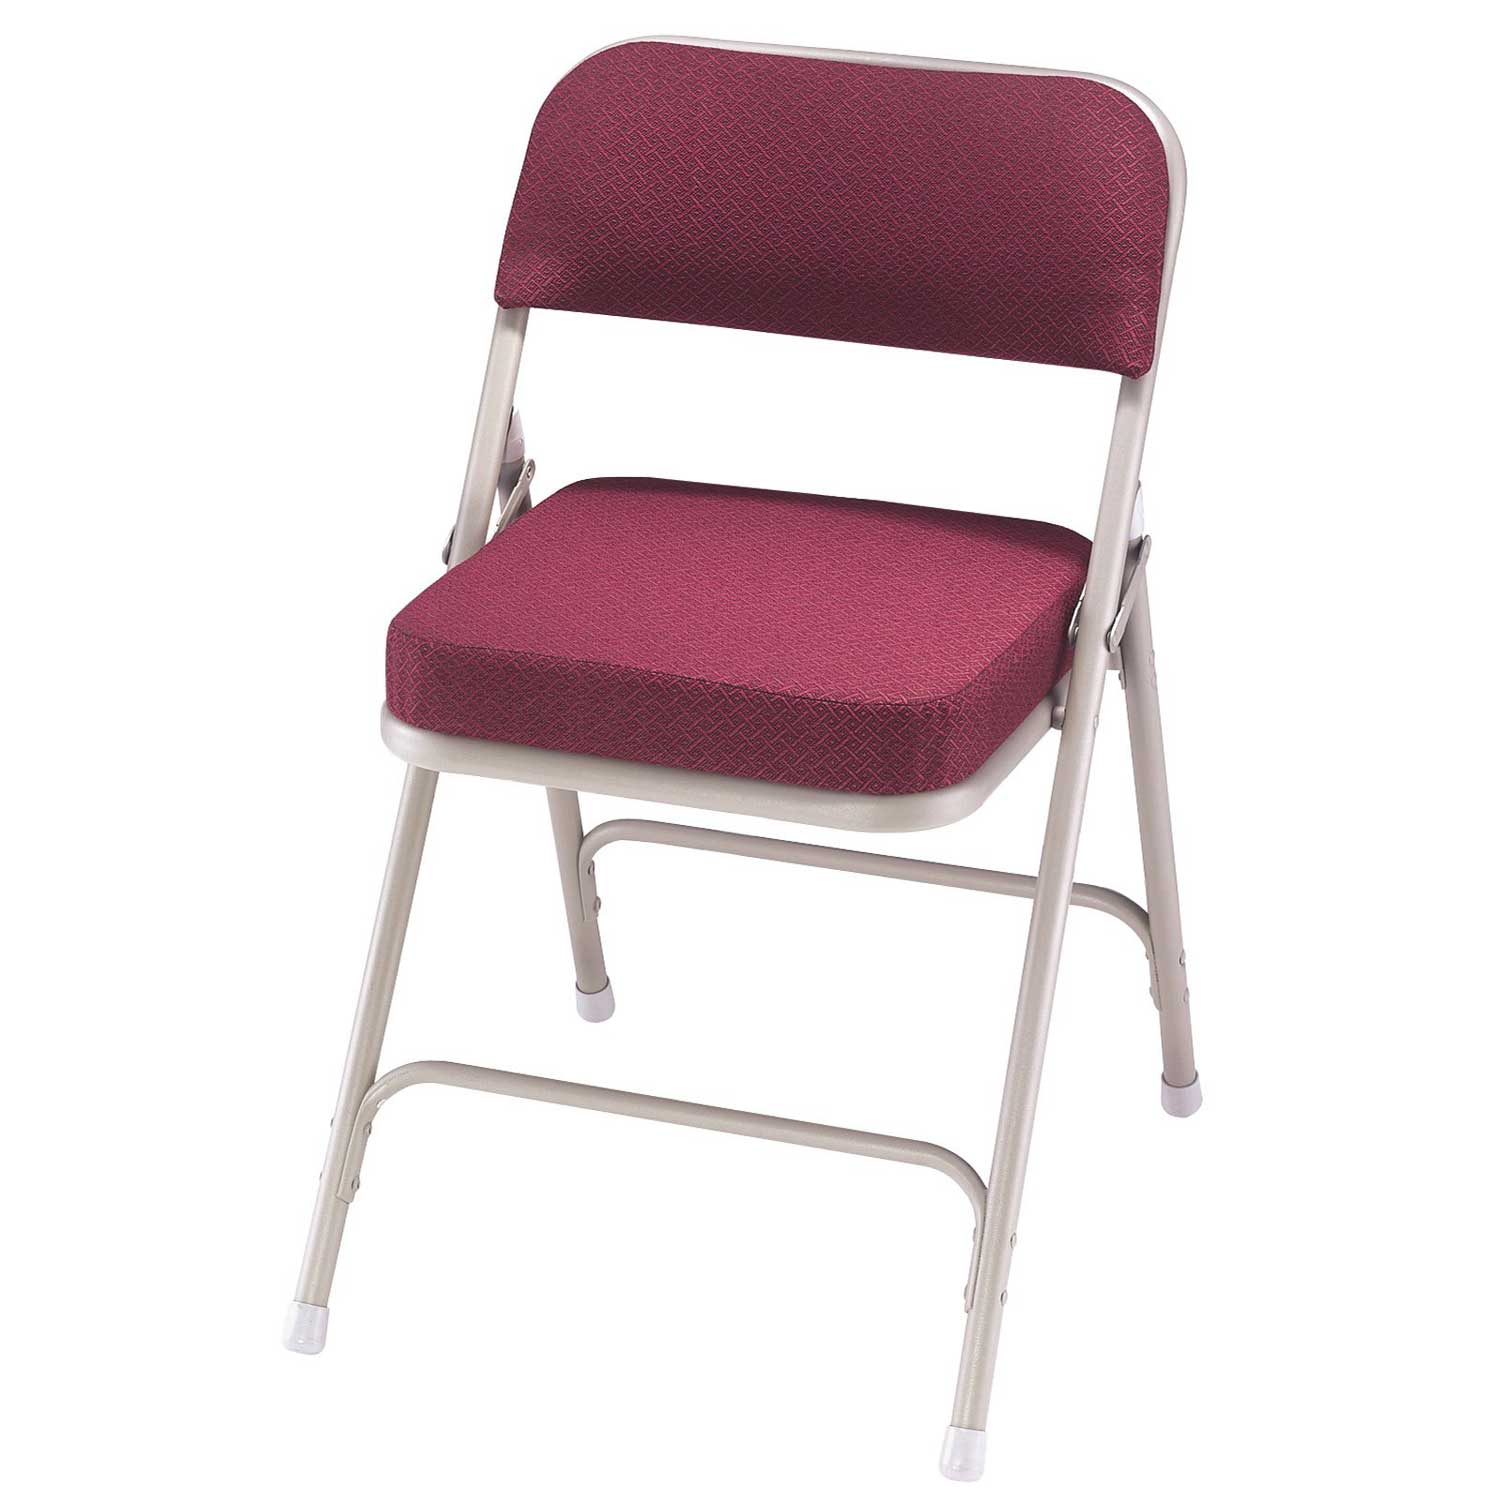 Folding Padded Chairs Style and Design